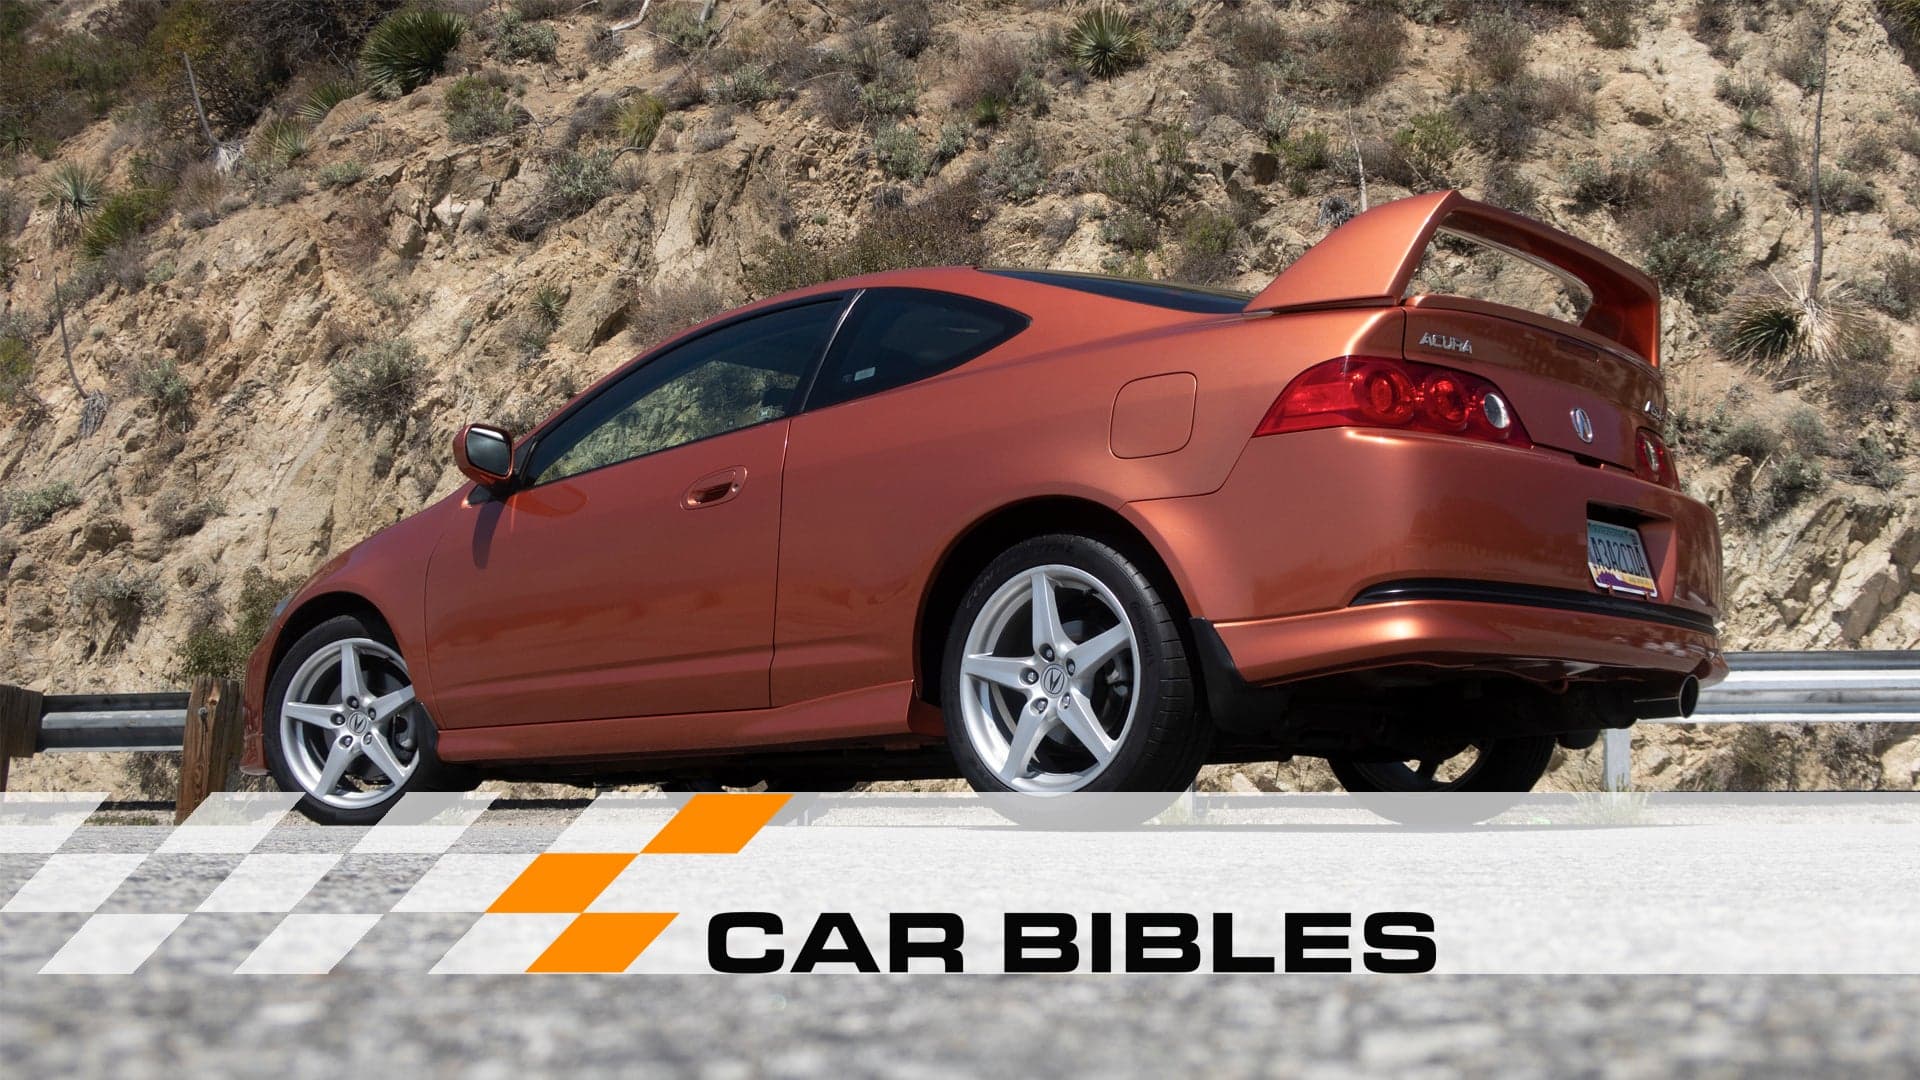 Review: The Acura Integra Type R Will Always Be My Favorite, but an RSX Type S Is Nicer to Drive